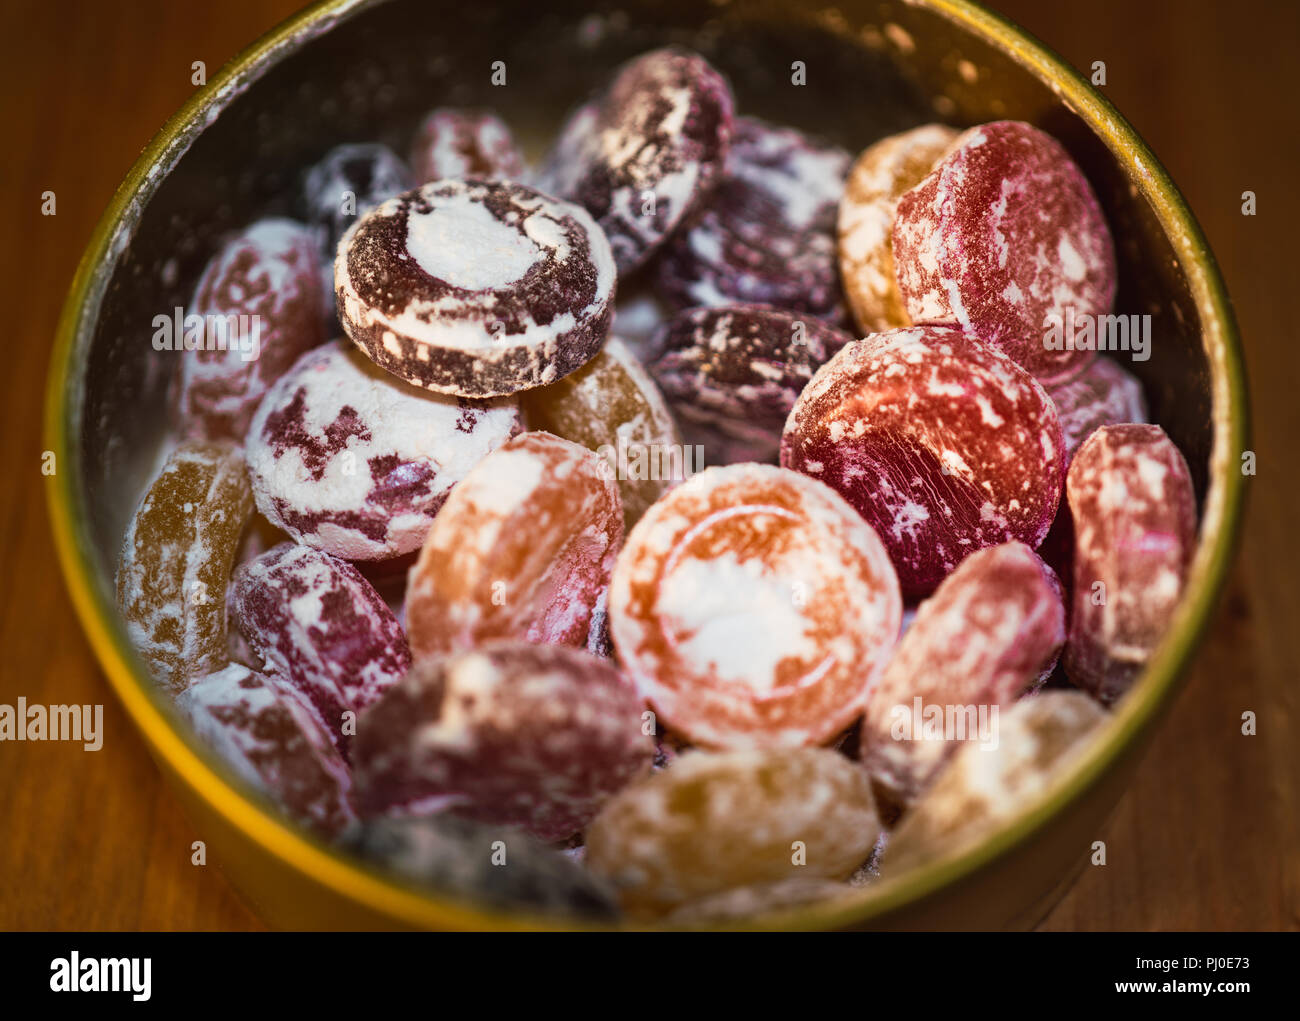 Colorful assortment of Old fashionned fruit flavored hard candy in a metal box close up Stock Photo